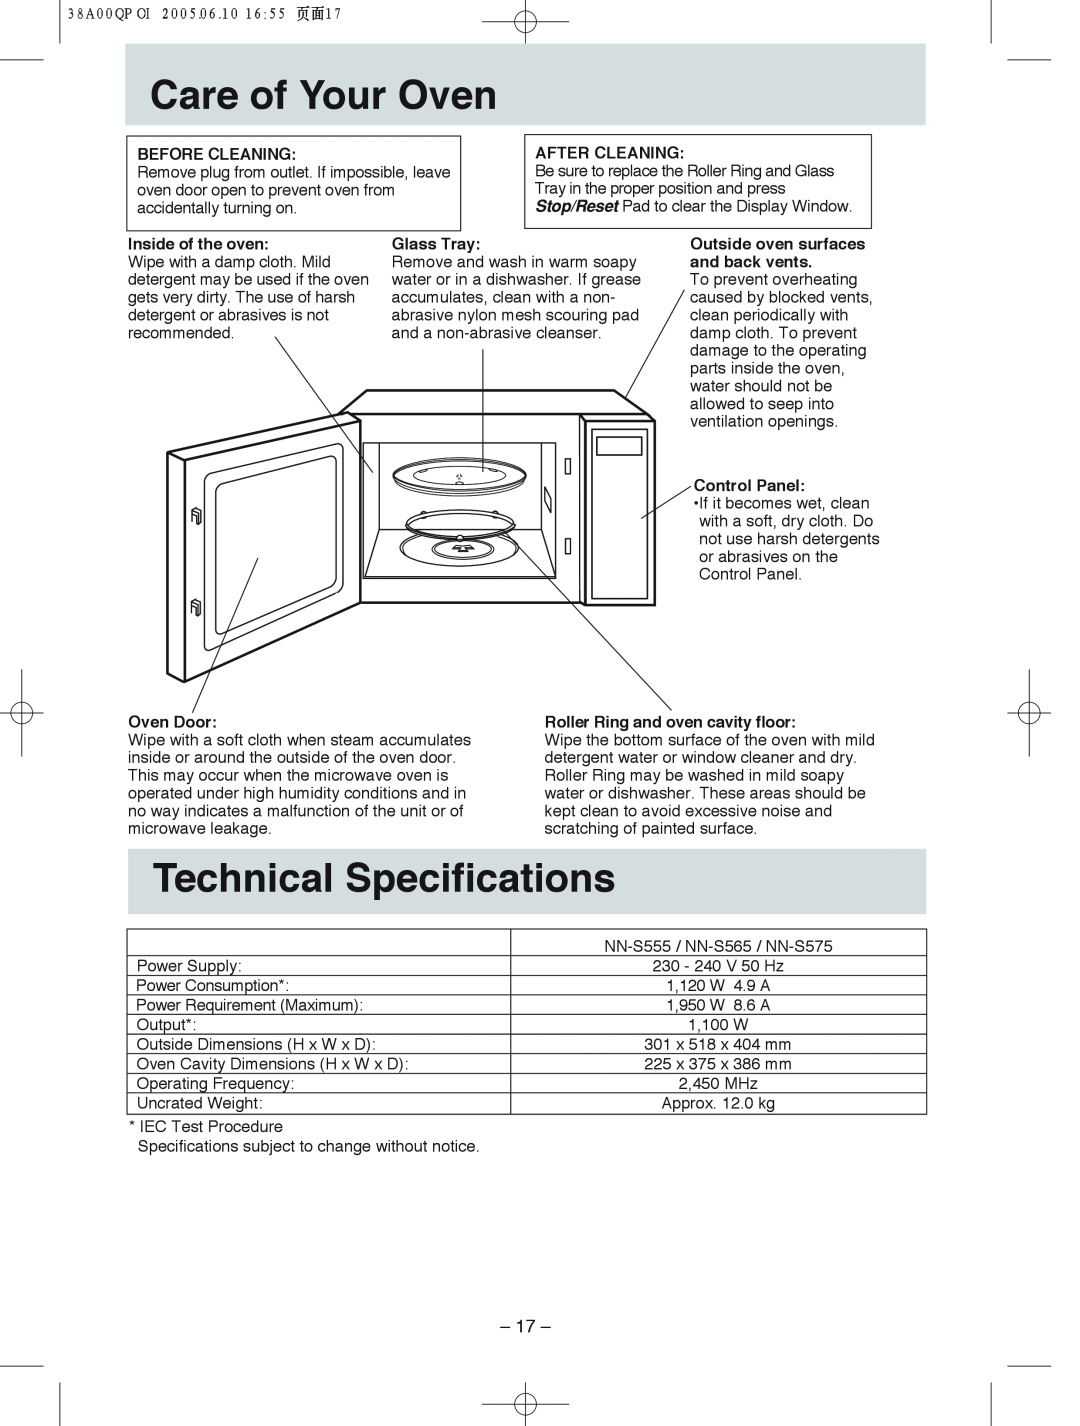 Panasonic NN-S555, NN-S575, NN-S565 manual Care!!! of!!!Your Oven, Technical Specifications 